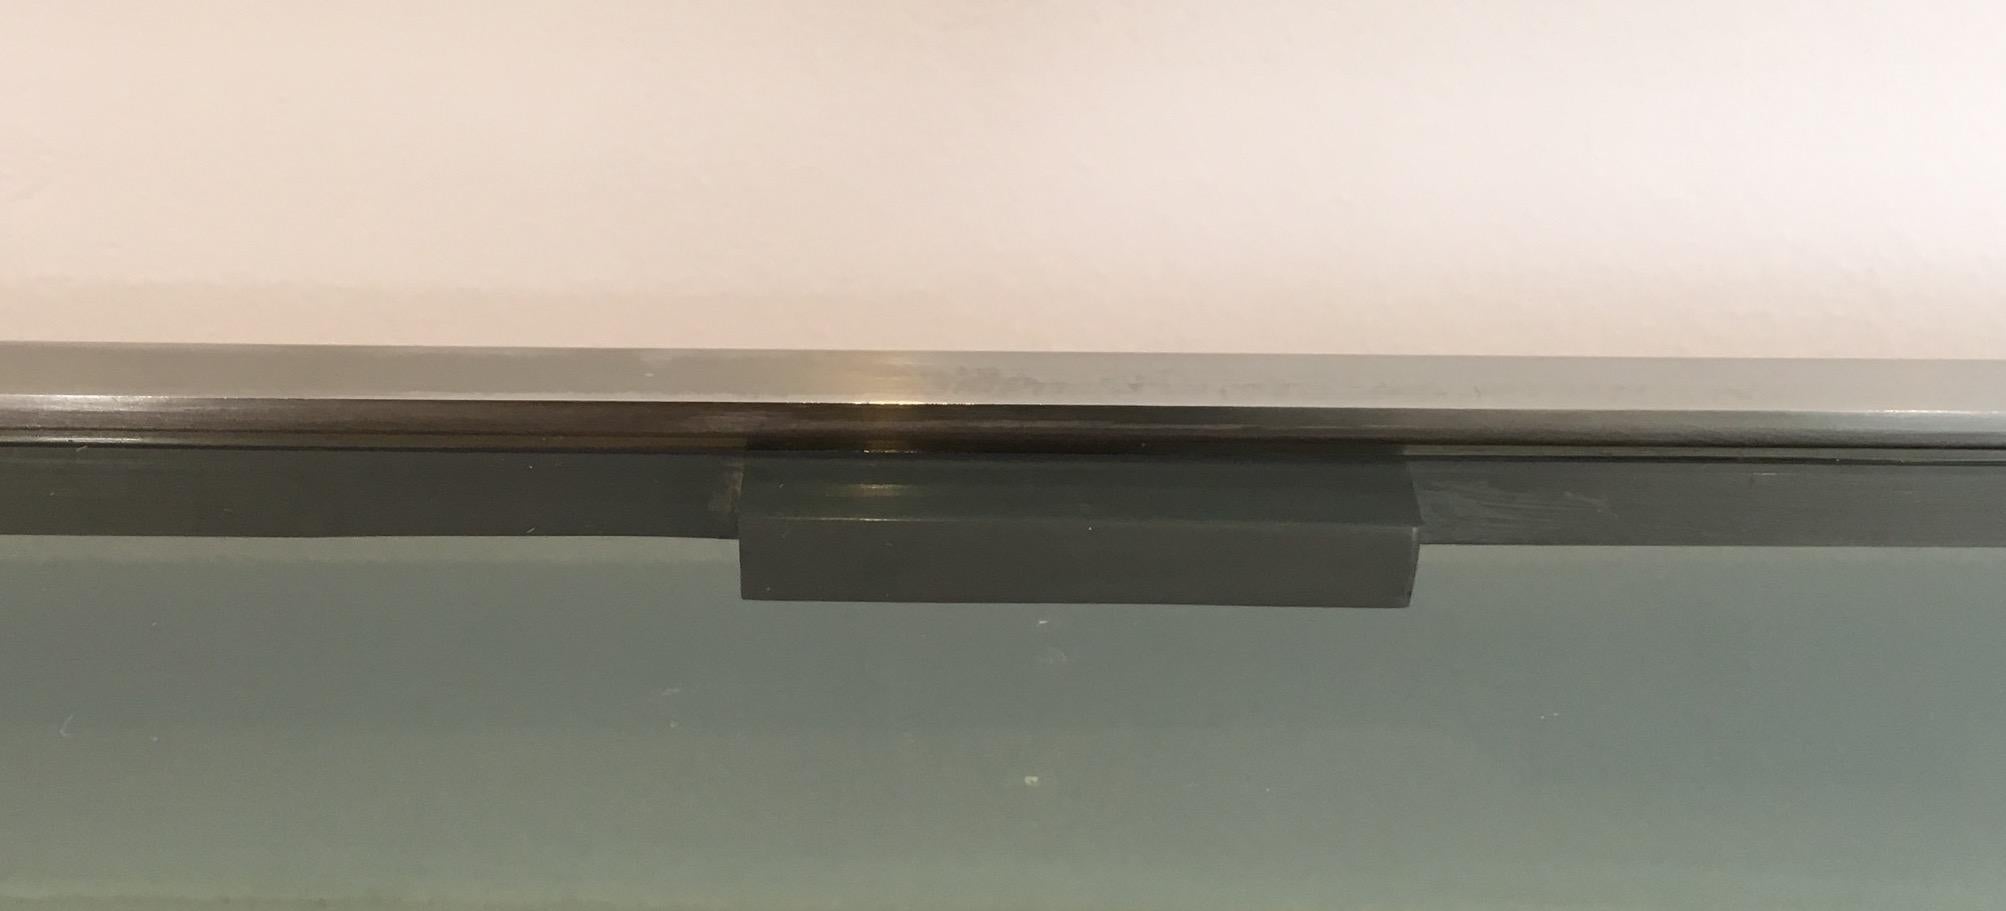 Brushed Steel Console Table with Glass Tops, by Guy Lefèvre for Maison Jansen For Sale 6